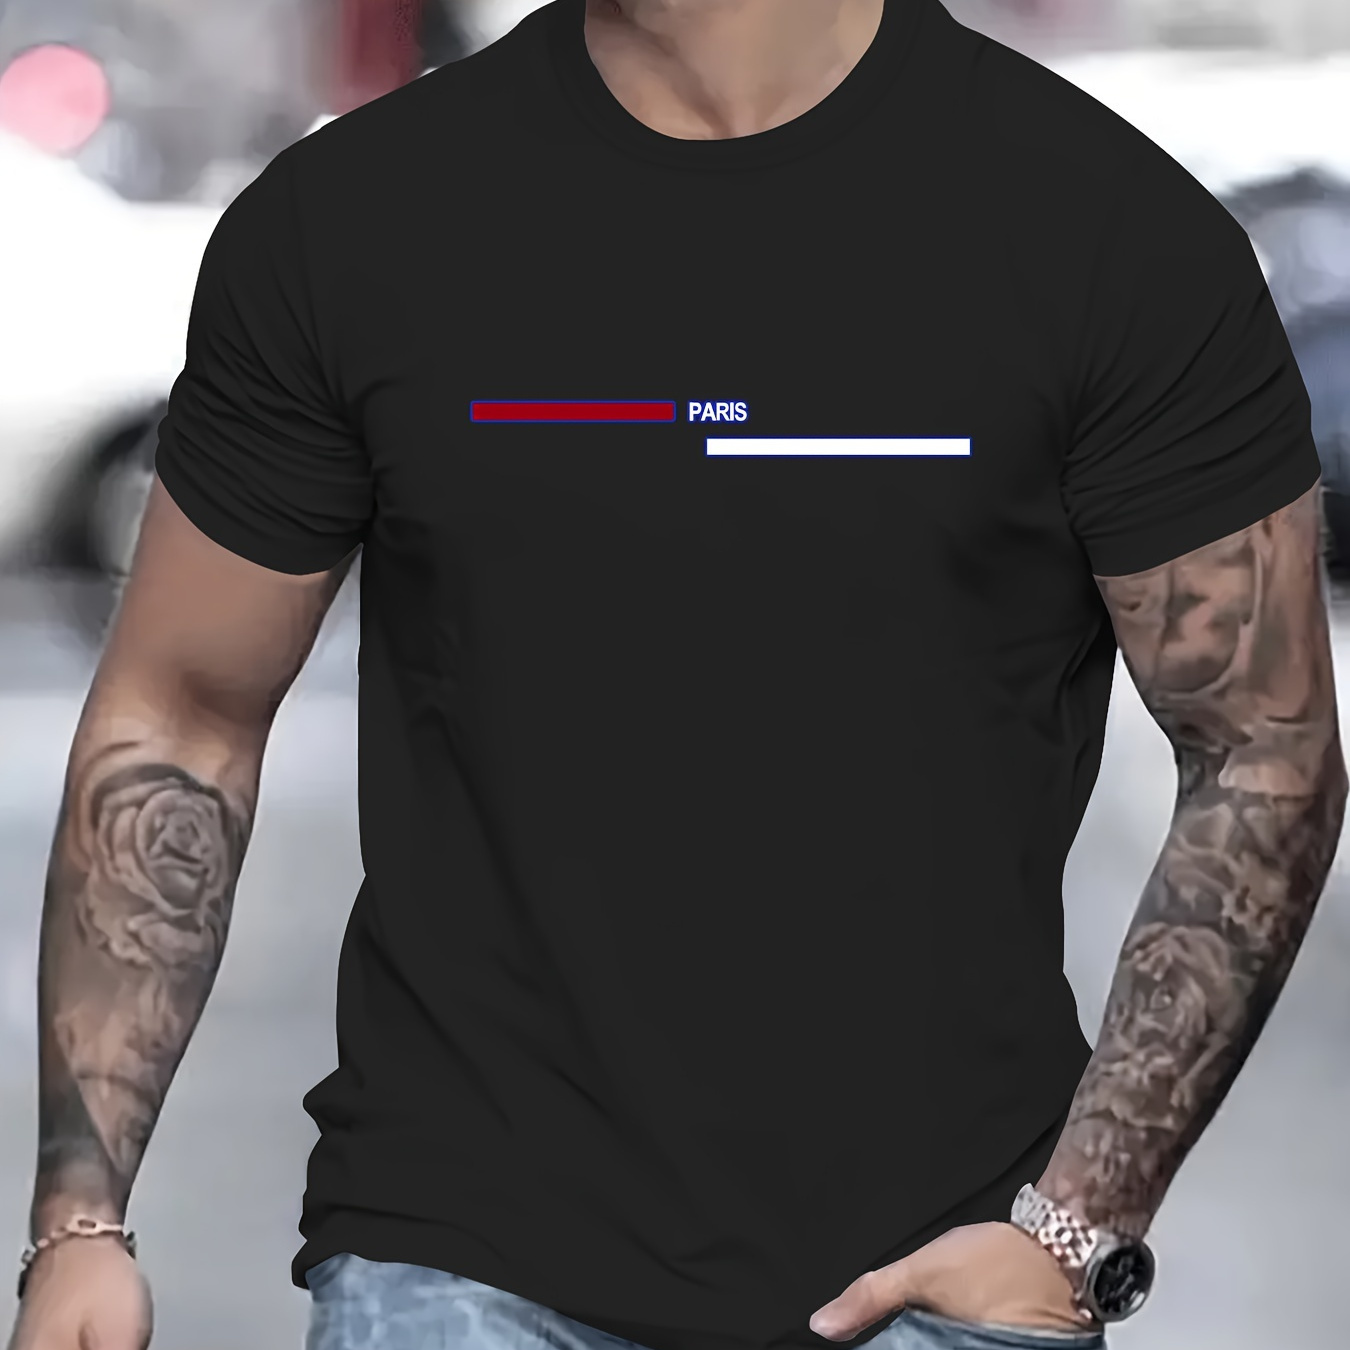 

Paris Letter Graphic Print Men's Creative Top, Casual Short Sleeve Crew Neck T-shirt, Men's Clothing For Summer Outdoor